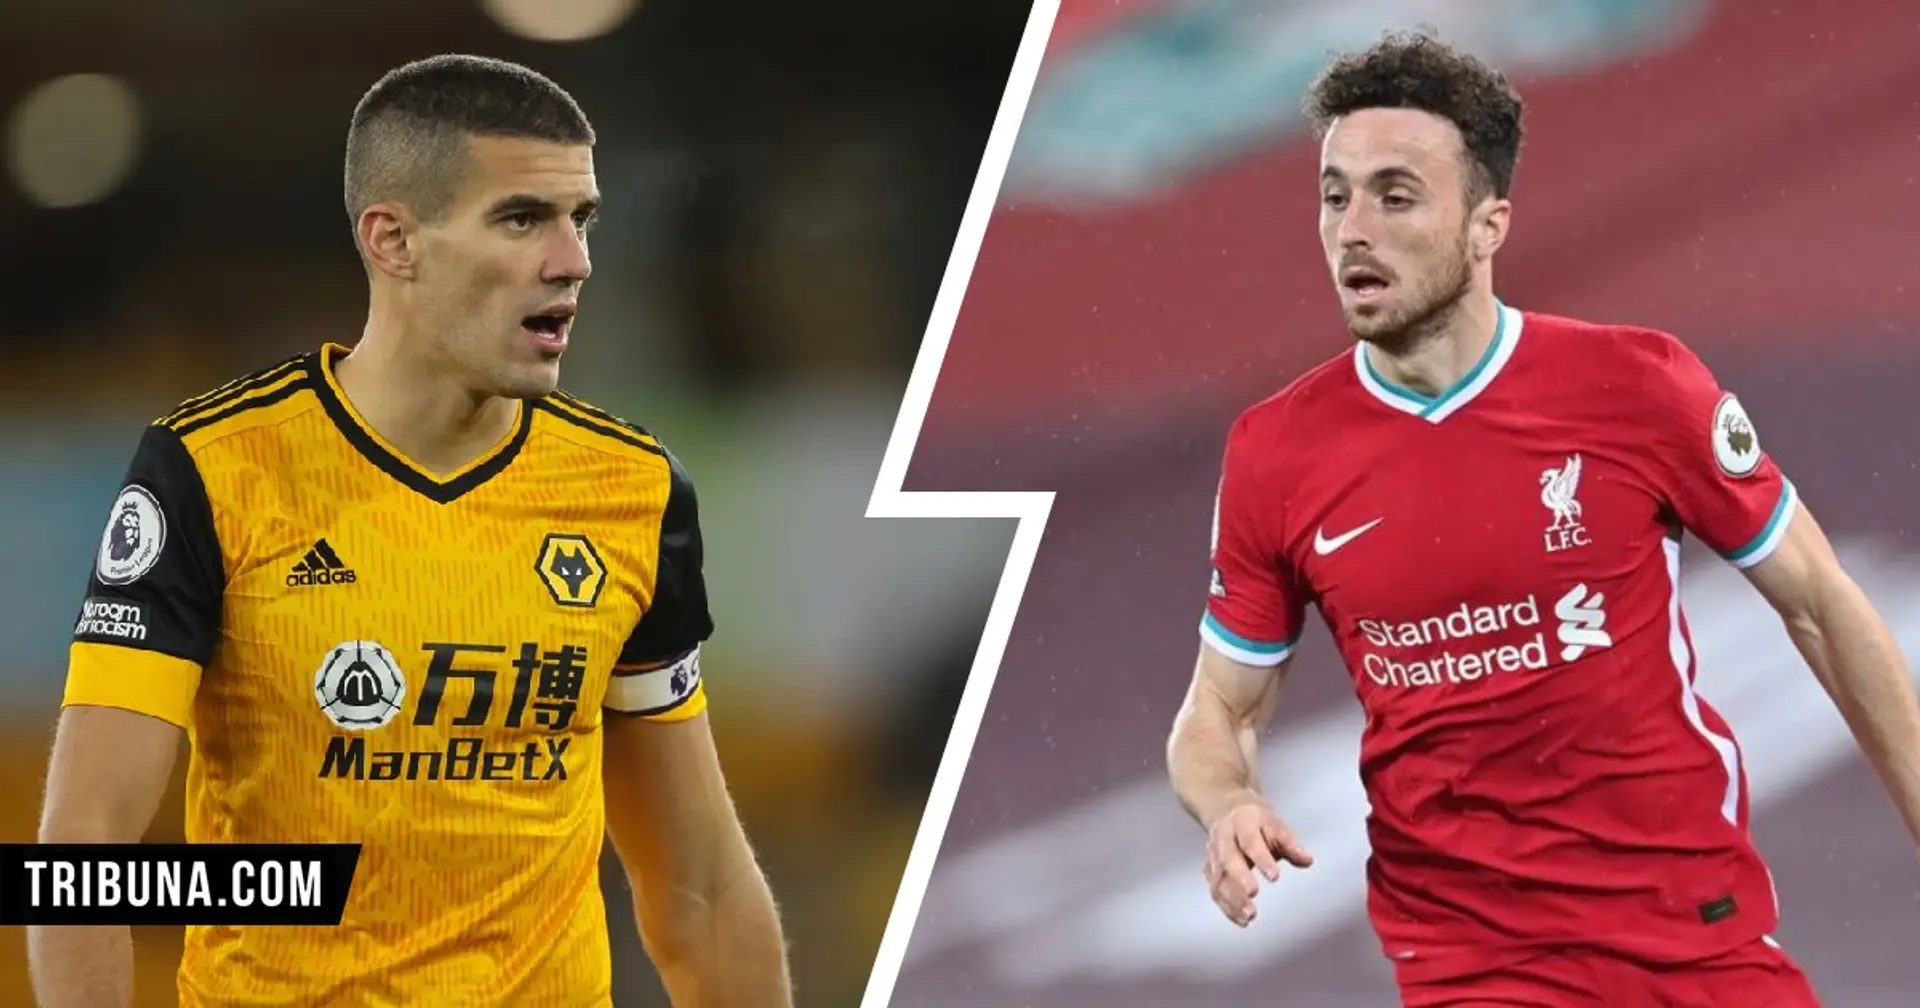 'We knew he was going to succeed': Coady praises Jota's incredible mentality 